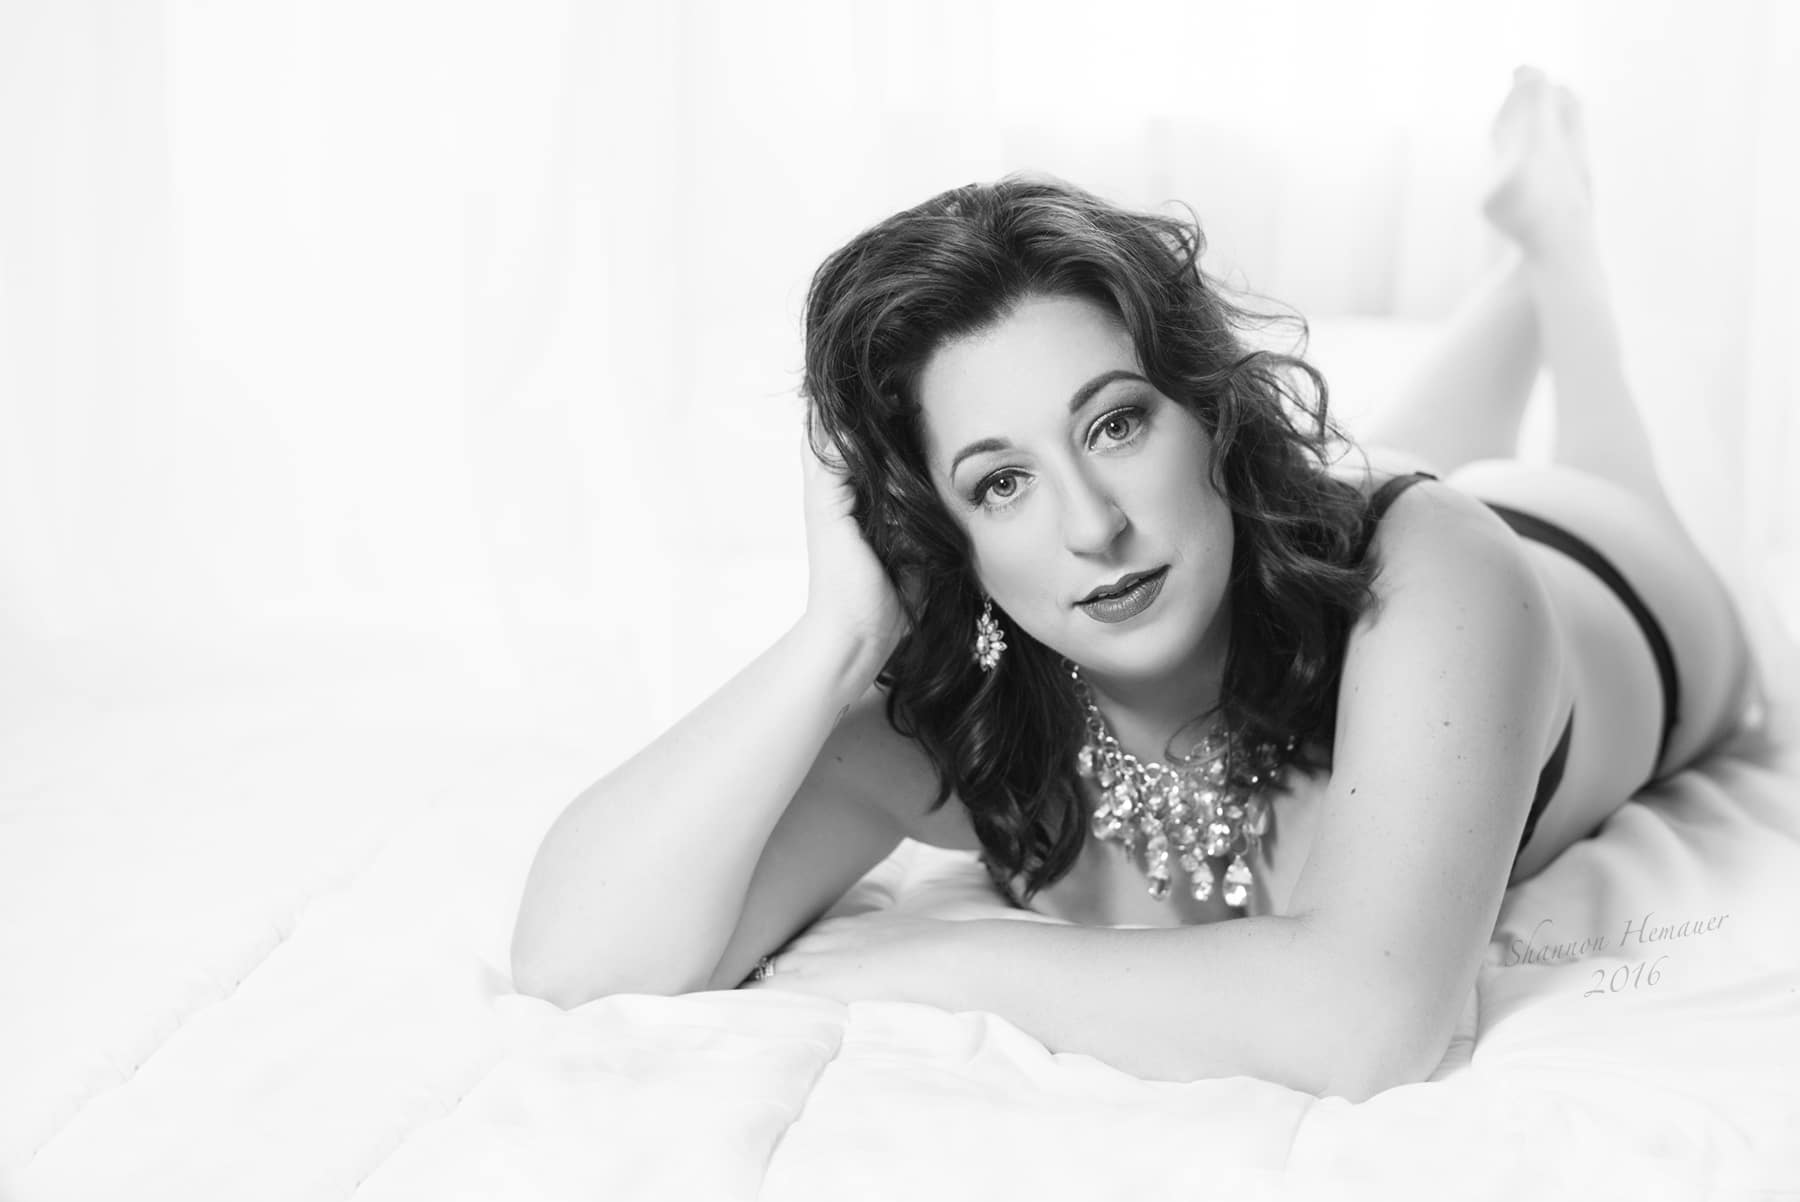 Boudoir and contemporary glamour portrait photography Shannon Hemauer Harrisburg, PA